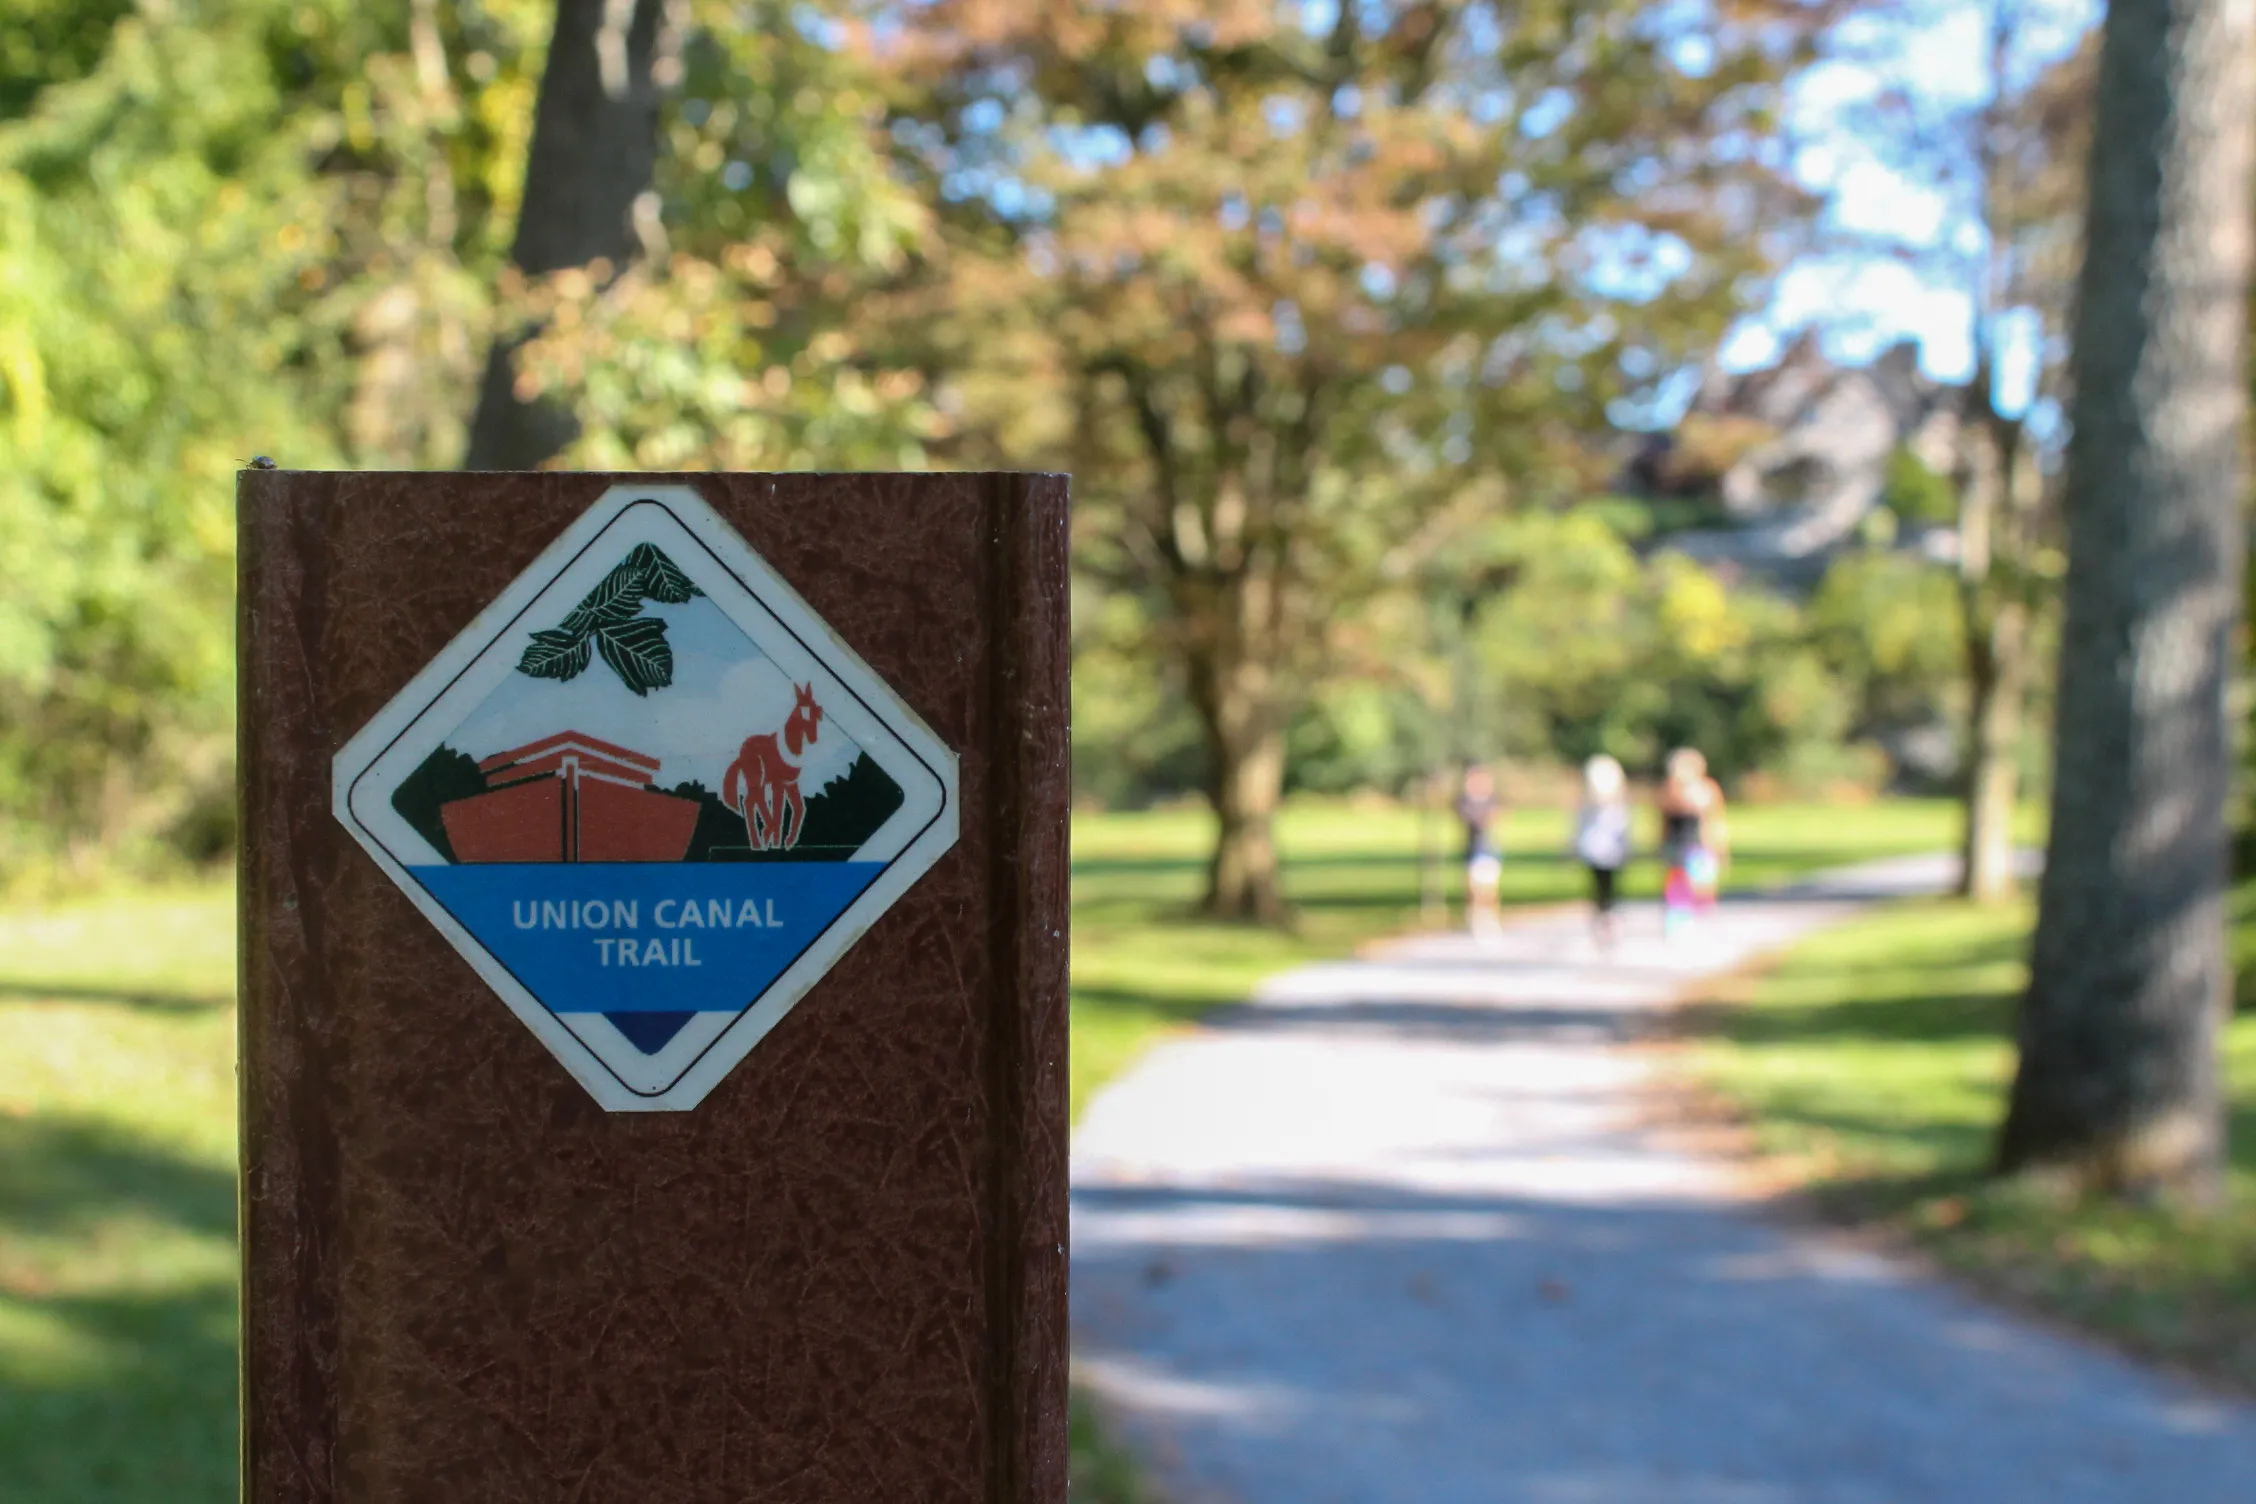 A photo of a Union Canal Trail sign with some people walking in the background.